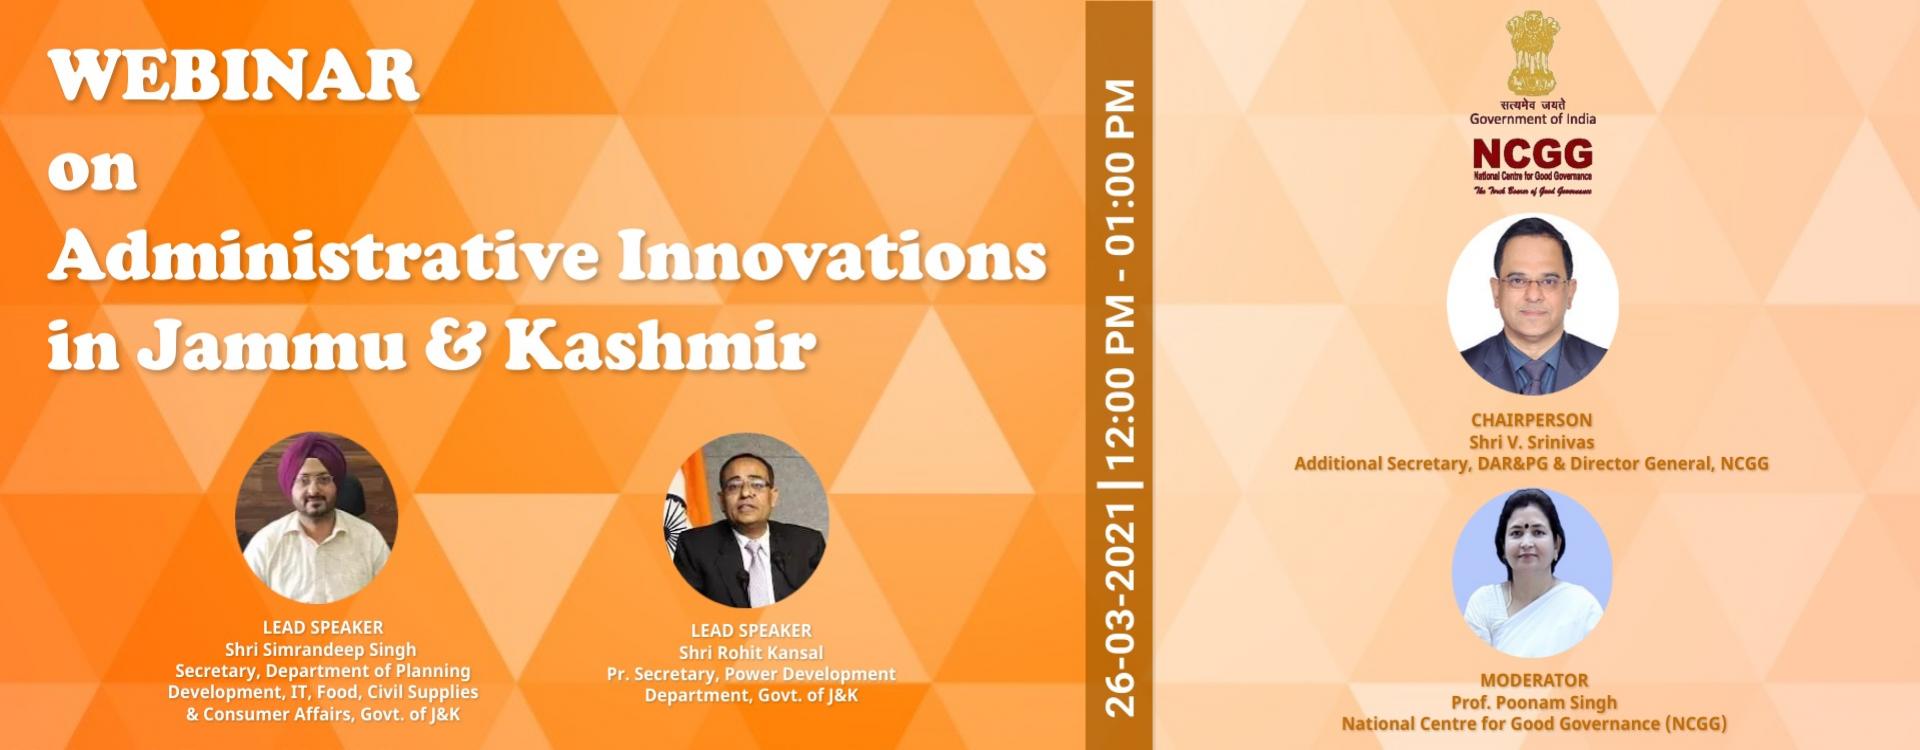 Webinar on &quot;Administrative Innovations in Jammu &amp; Kashmir&quot;